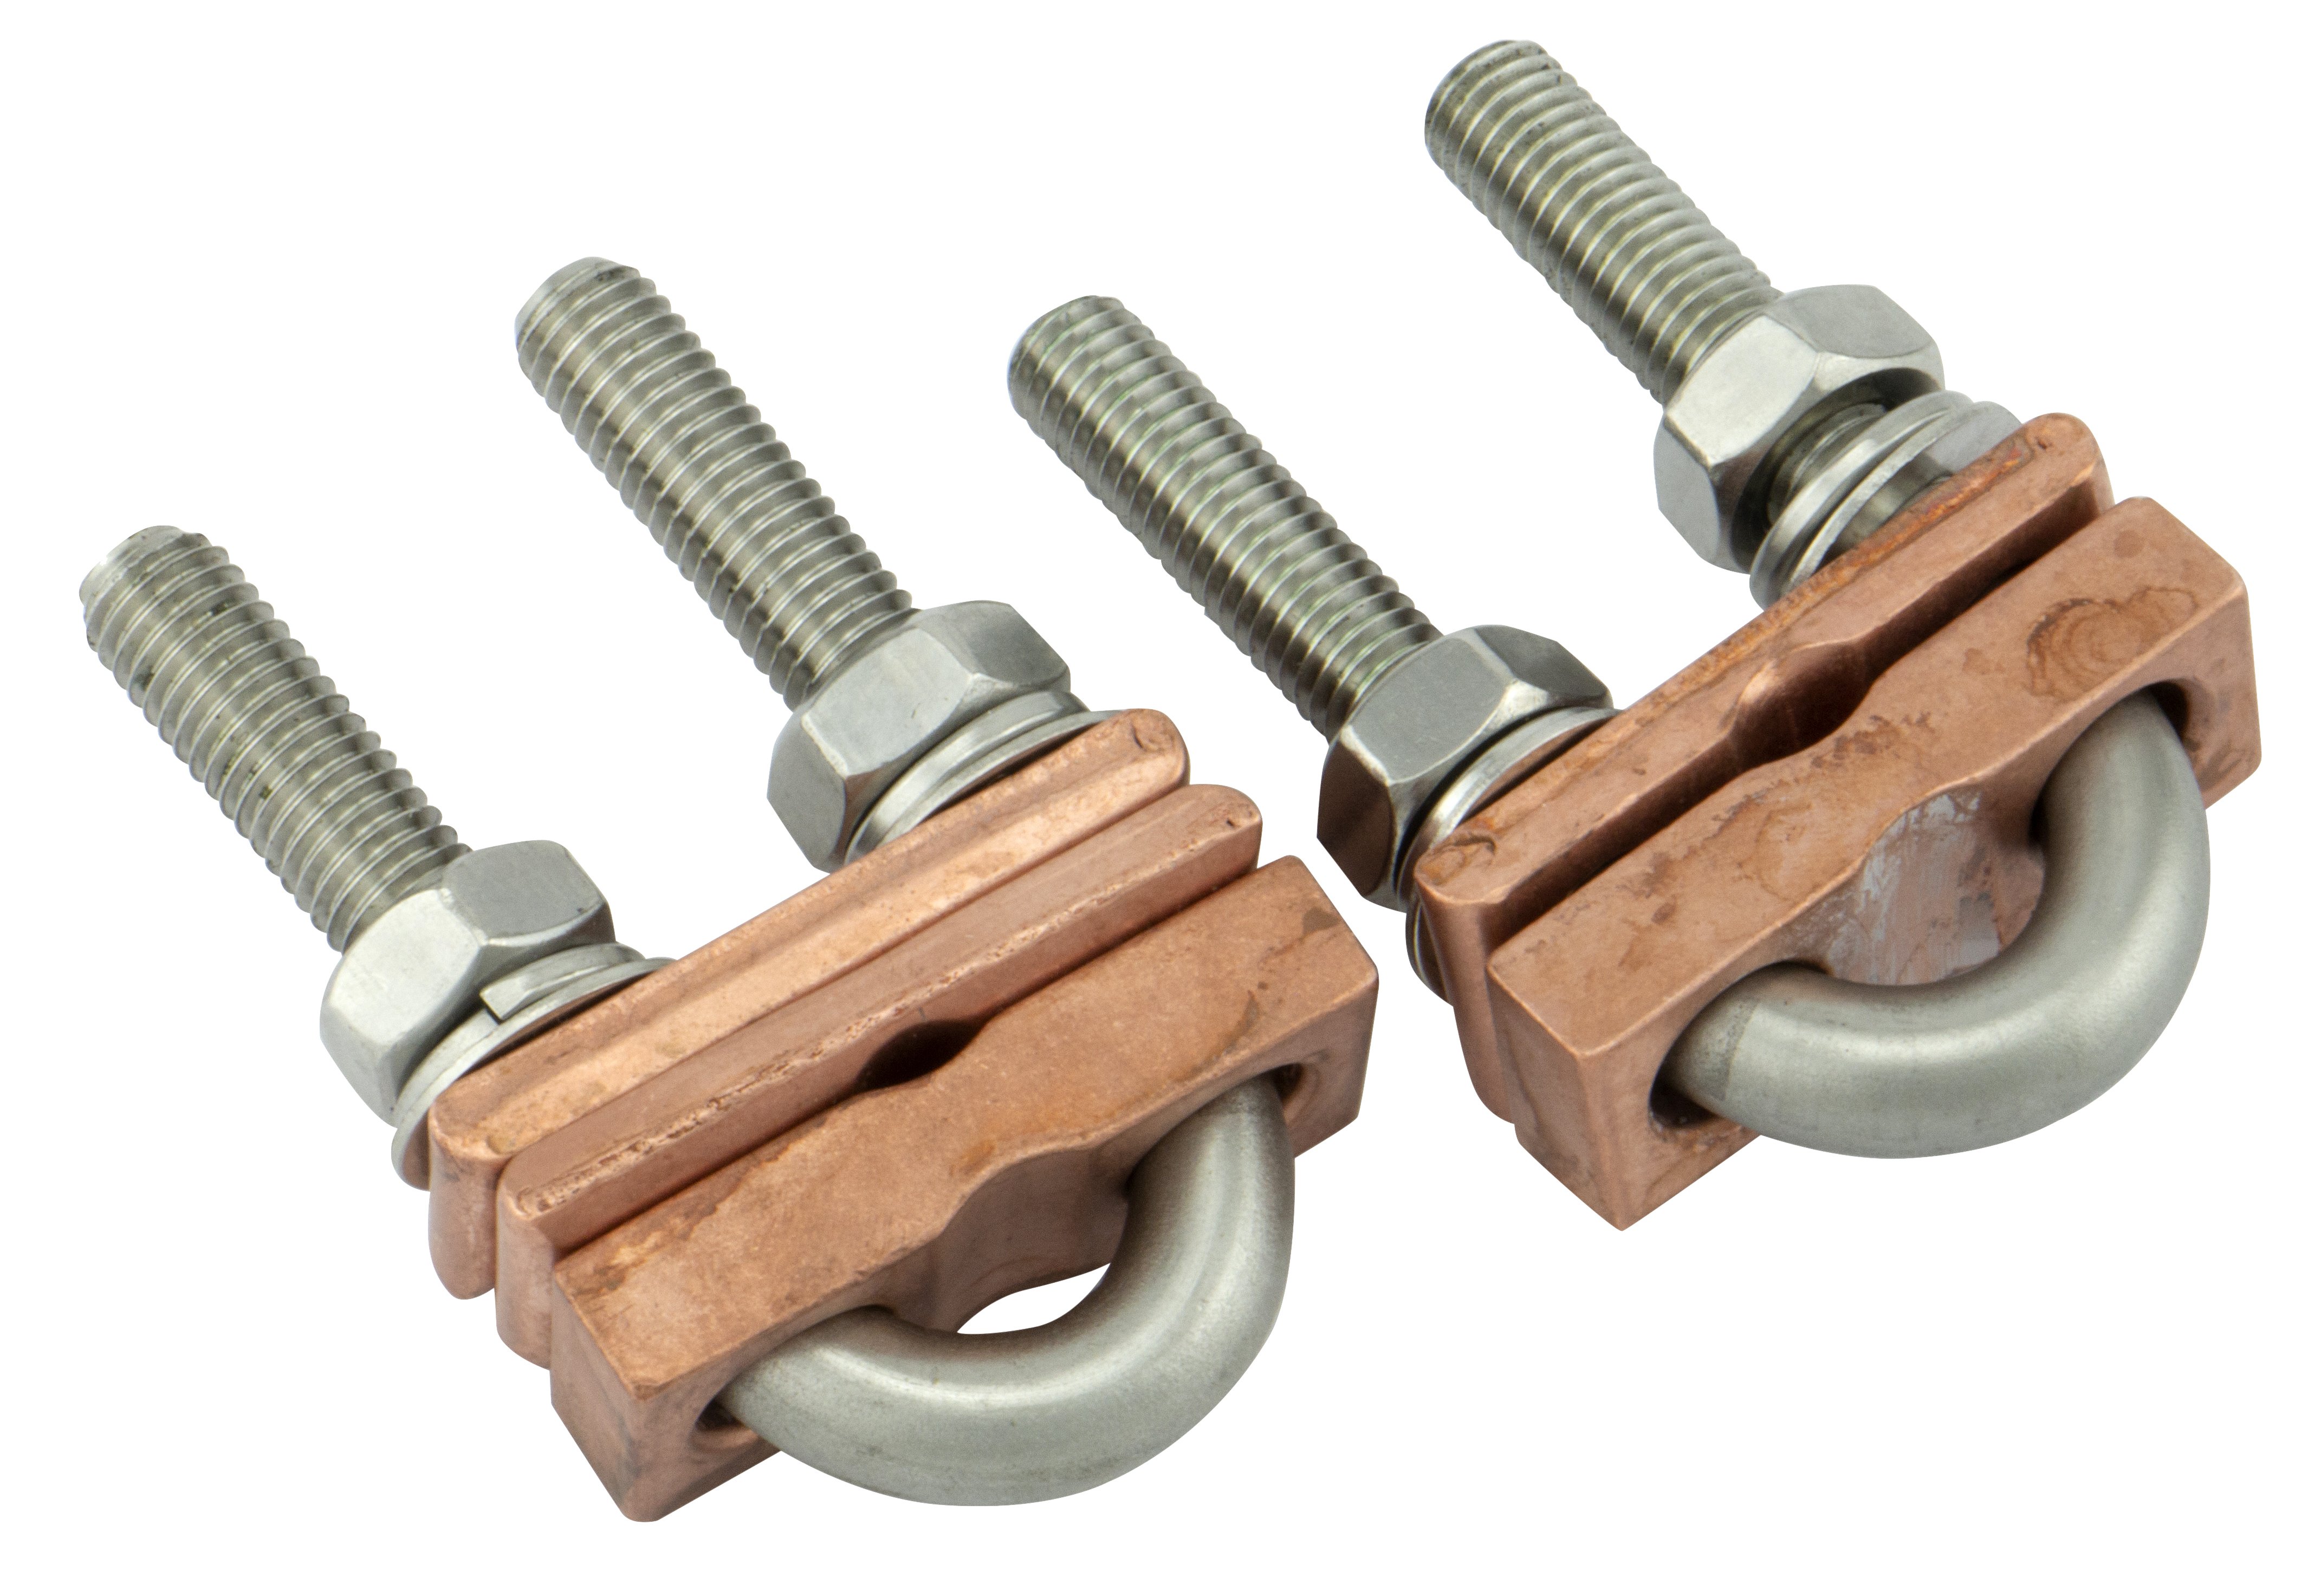 Mechanical clamps